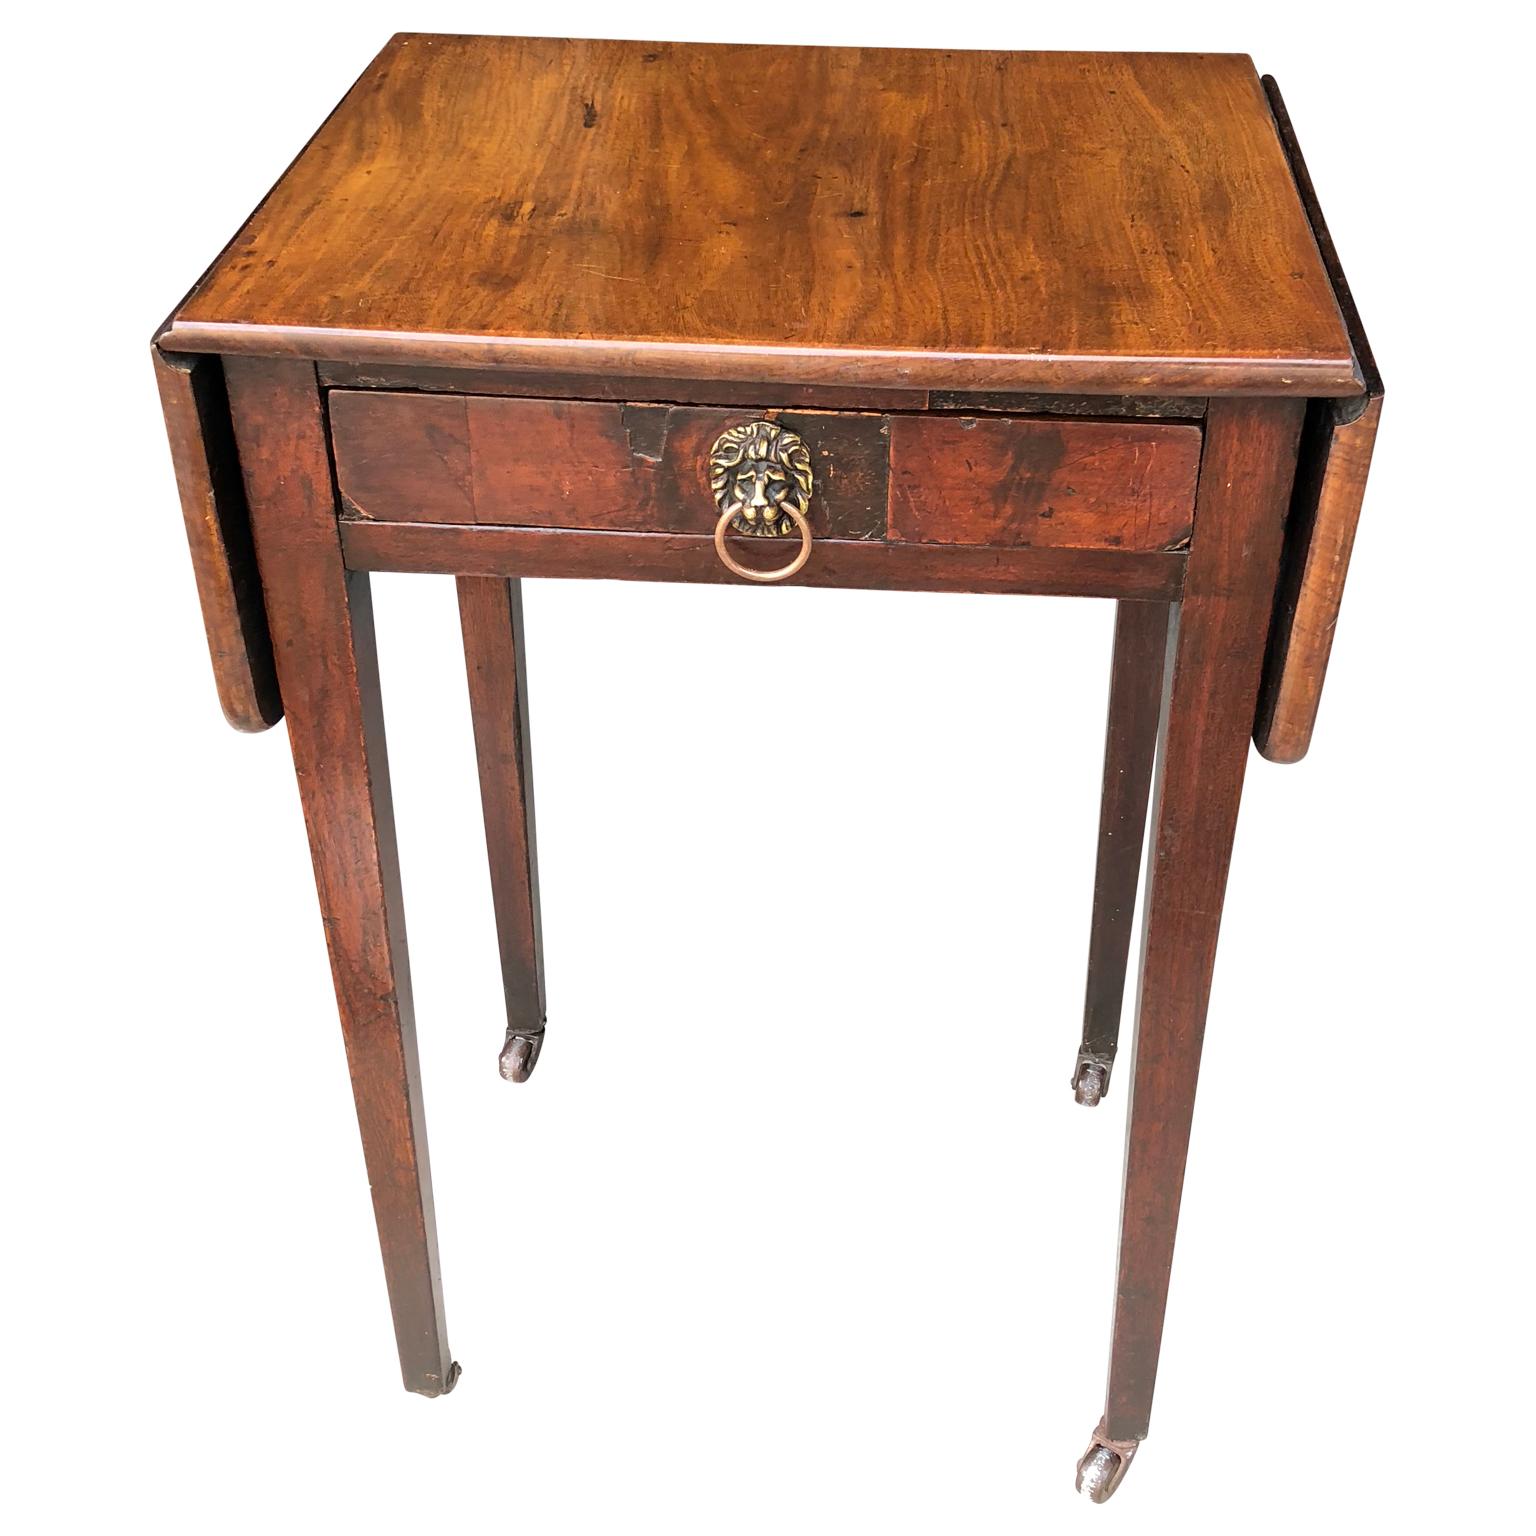 Classic Regency Style Drop-Leaf Table with Lion-Head Hardware